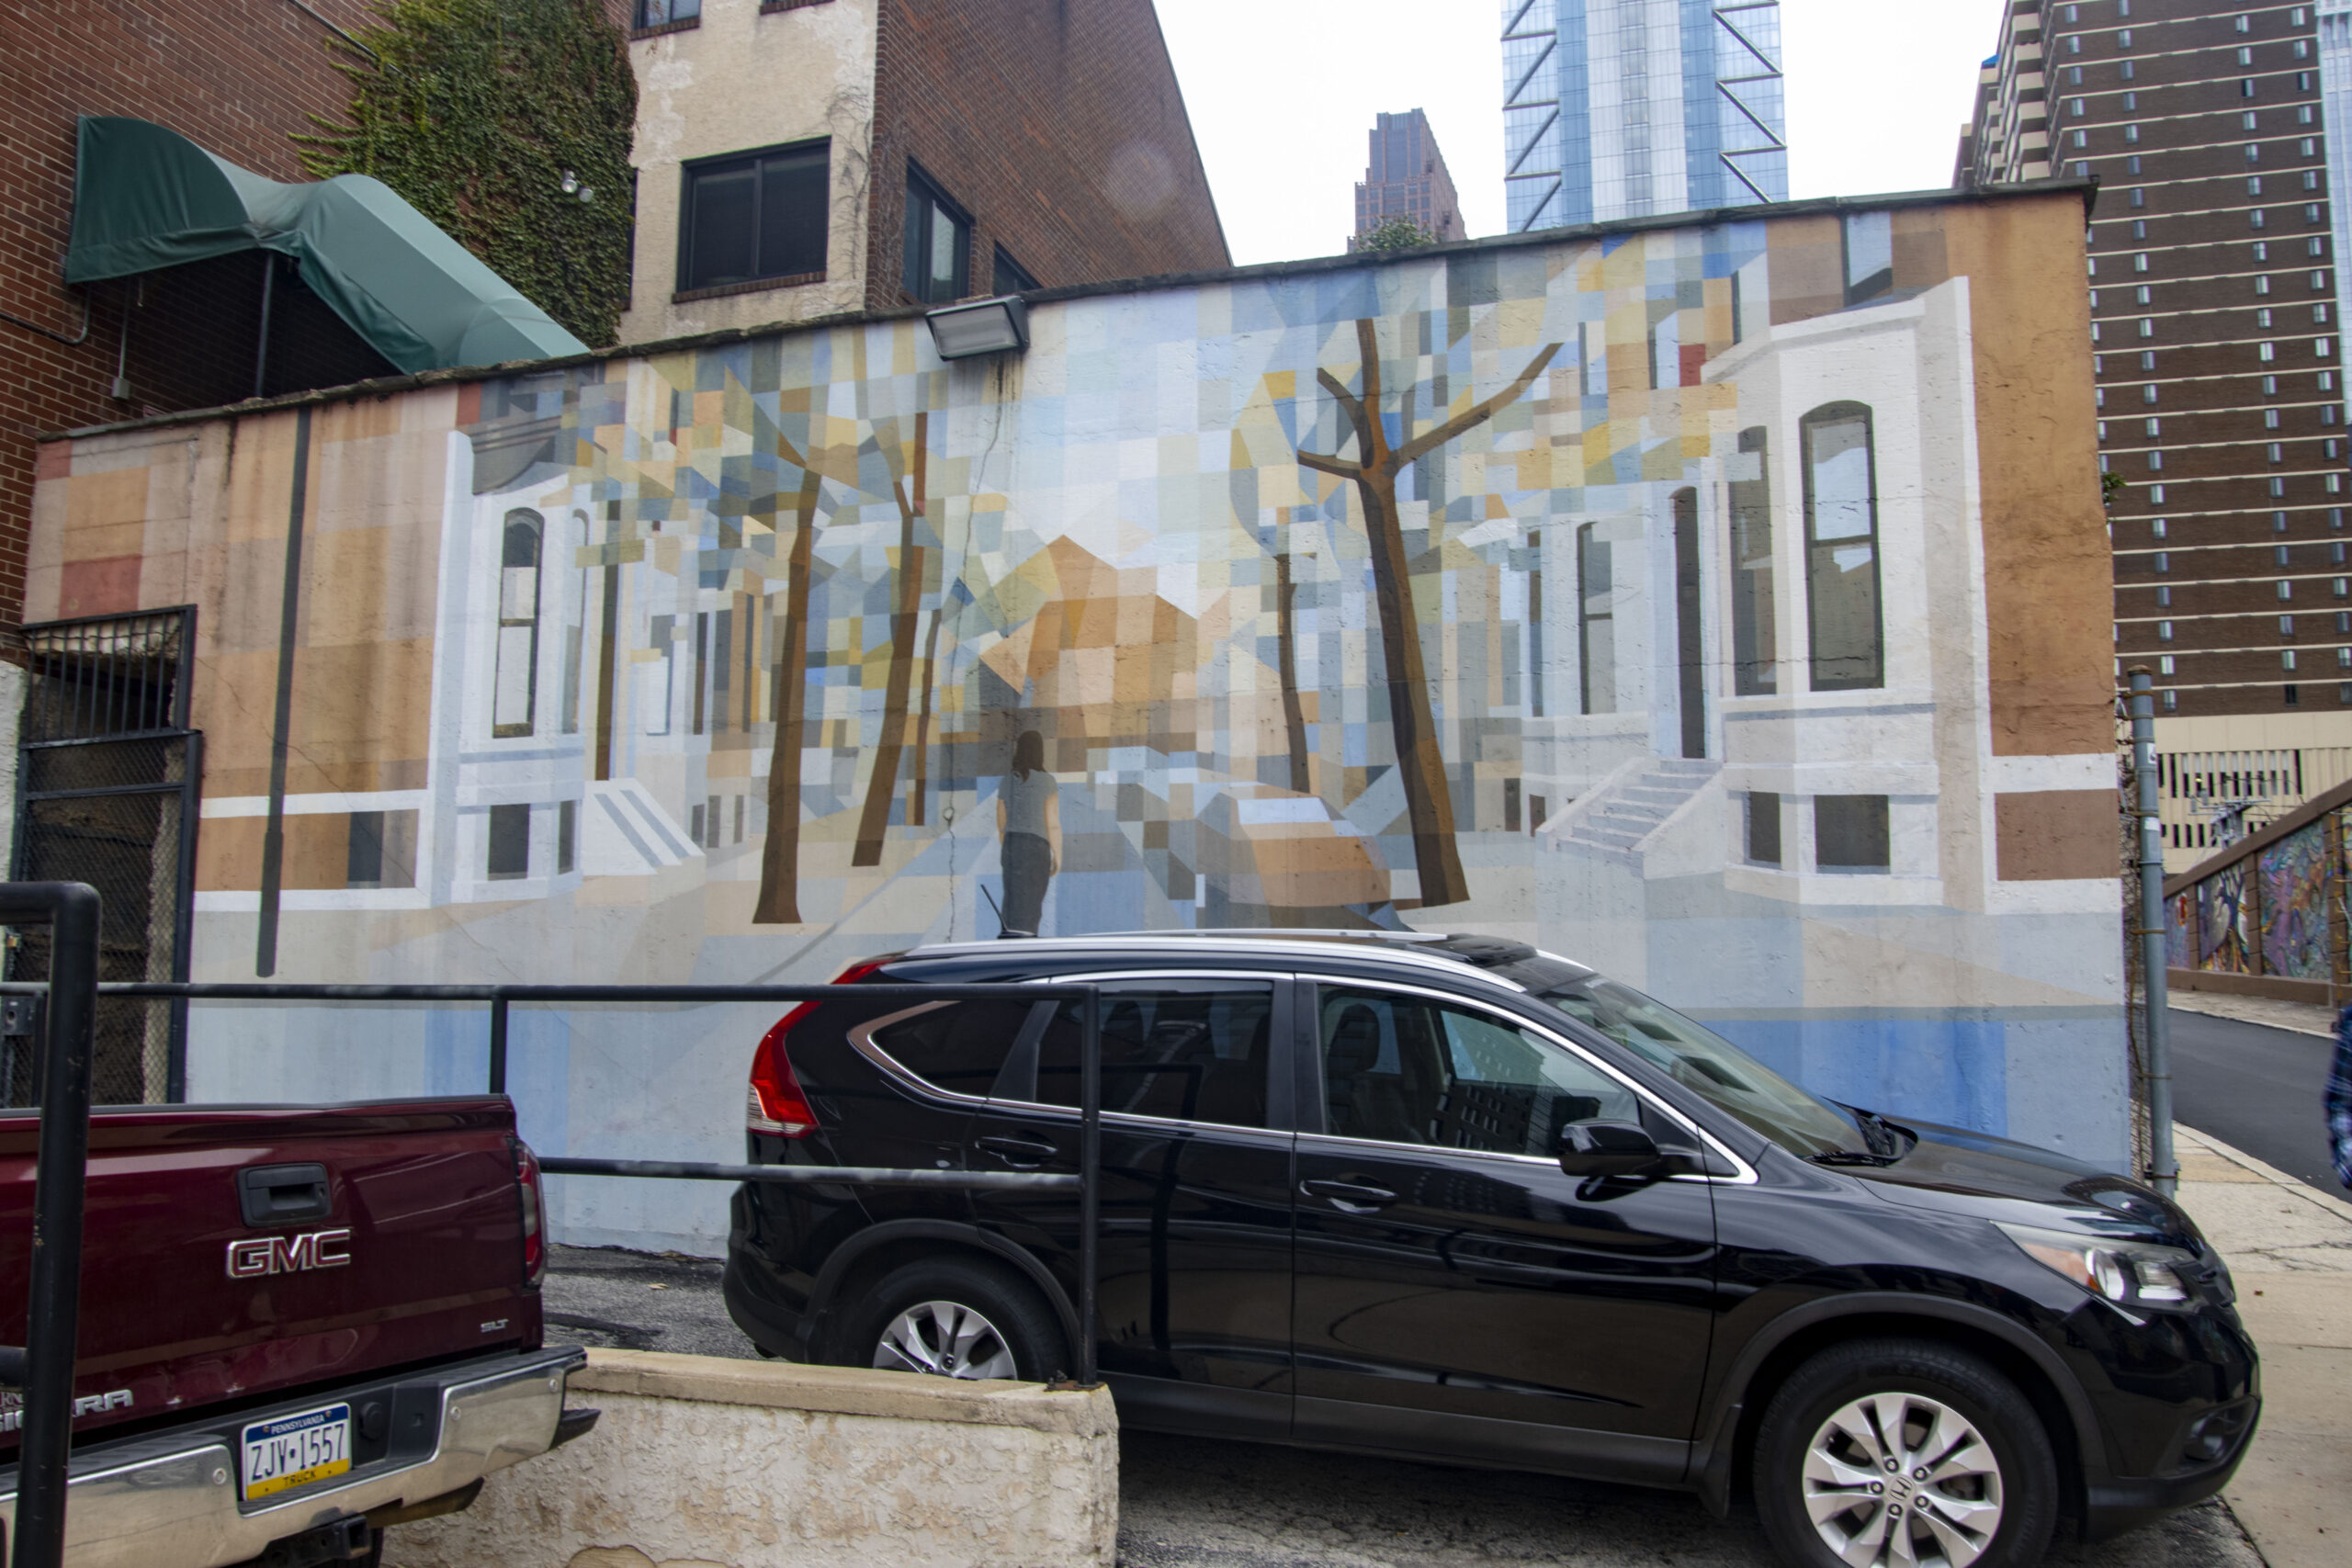 Philly Mural Tour (22 of 37)